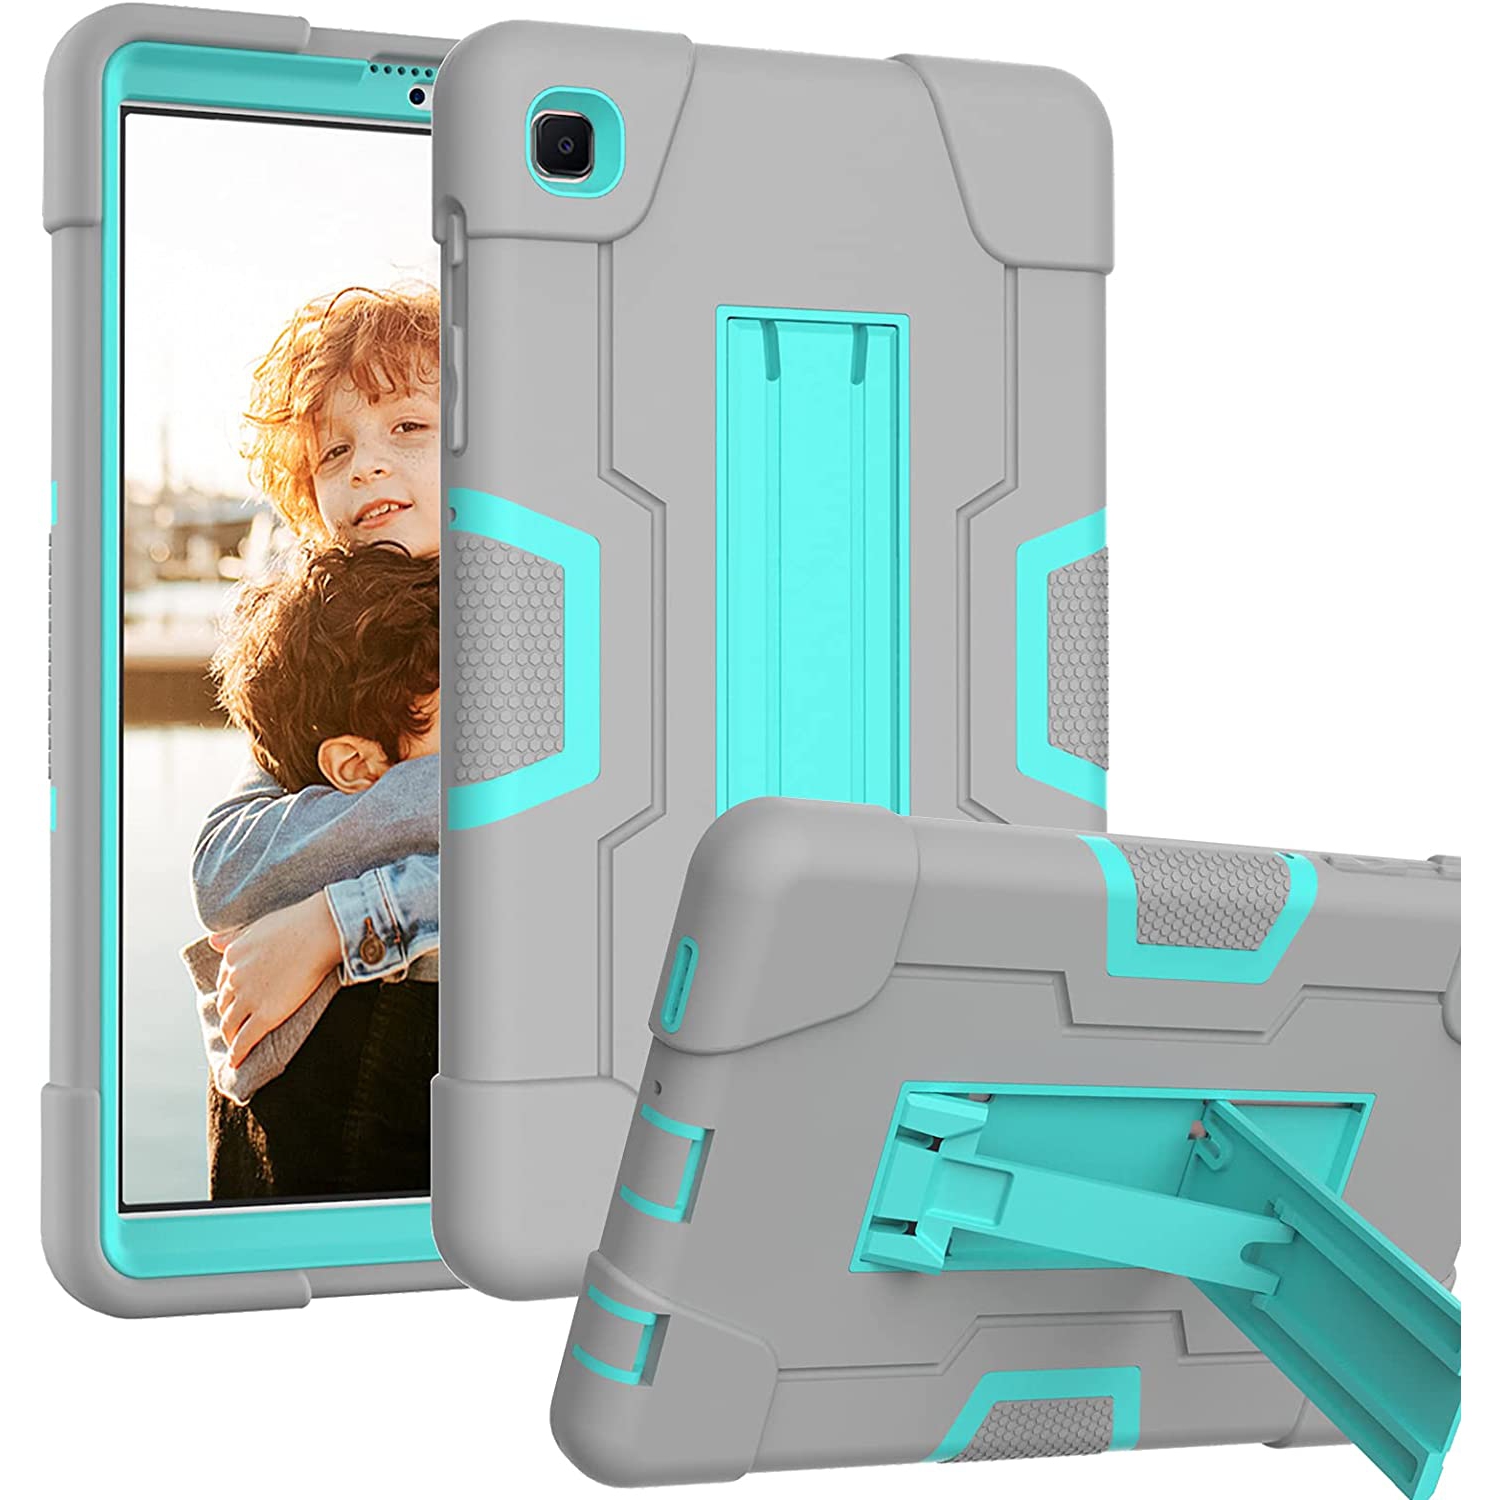 H Case for Samsung Galaxy Tab A7 Lite T220/T225, Full Body Rugged Kids Case with Kickstand Heavy Duty Shockproof Drop-Proof Protection Cover for Samsung Galaxy Tab A7 Lite 2021 (Gr